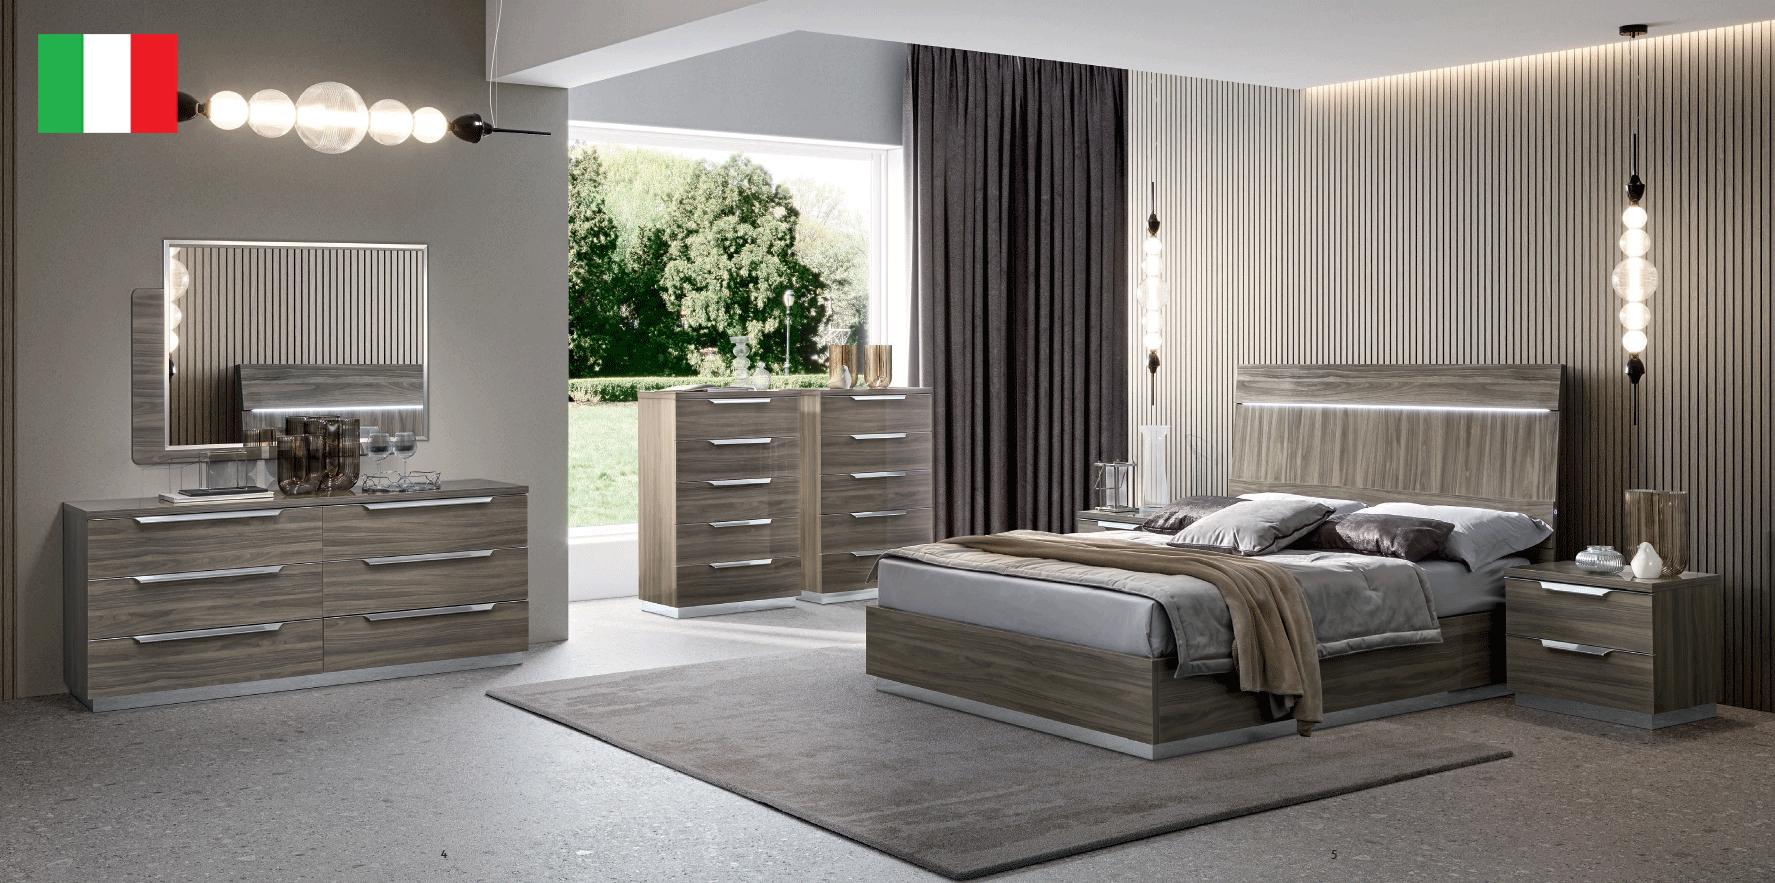 Brands Camel Gold Collection, Italy Kroma Bedroom GREY by Camelgroup – Italy